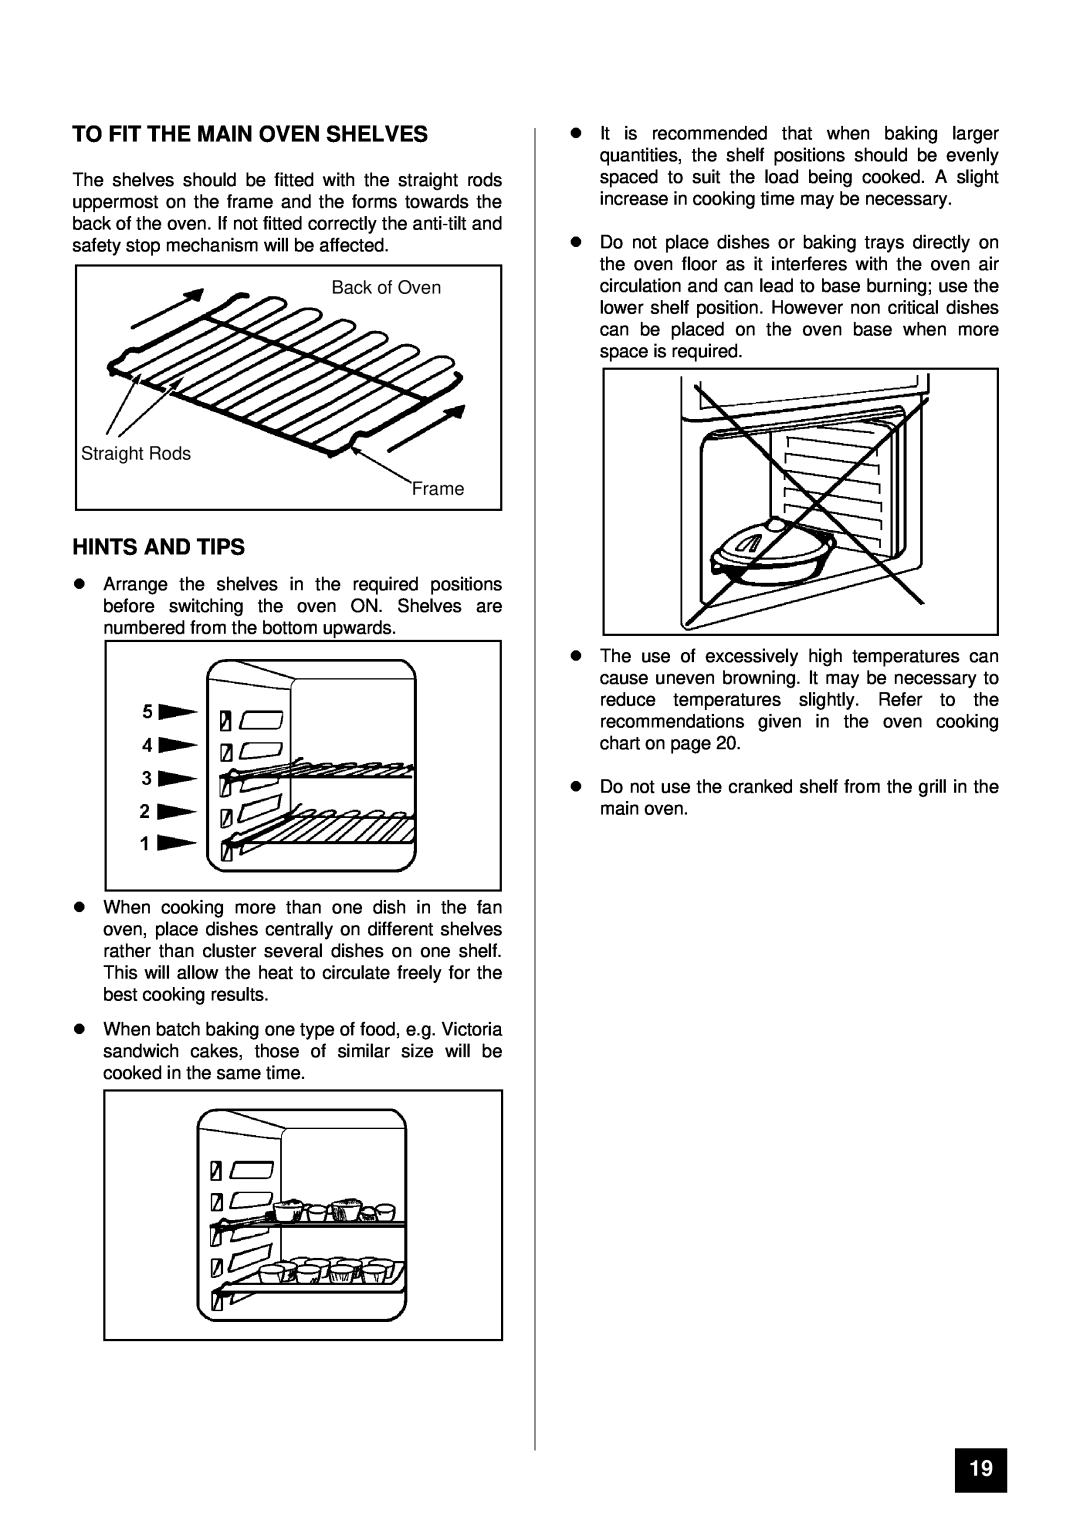 Electra Accessories EL 370 manual To Fit The Main Oven Shelves, lHINTS AND TIPS, Back of Oven Straight Rods Frame 